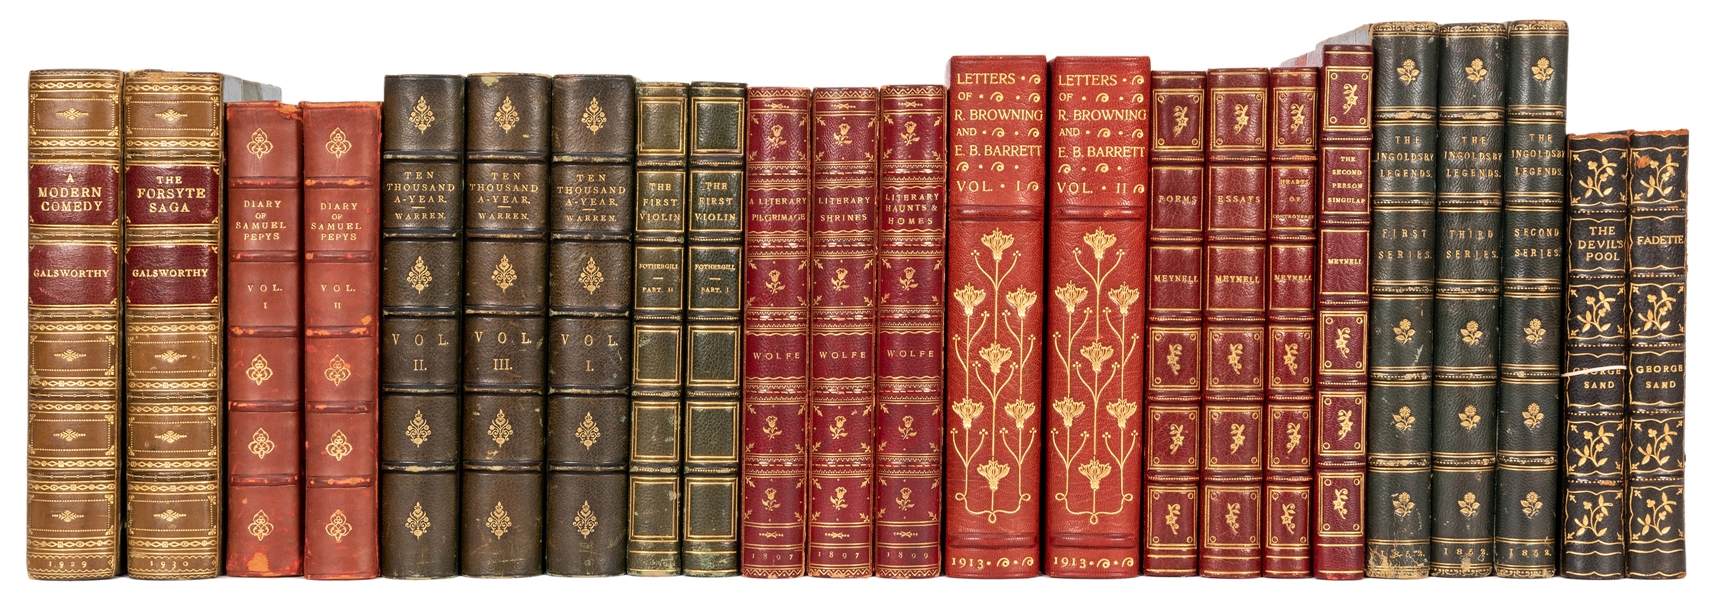 Full Shelf of Finely Bound Small Sets of Literature. 23-volumes.